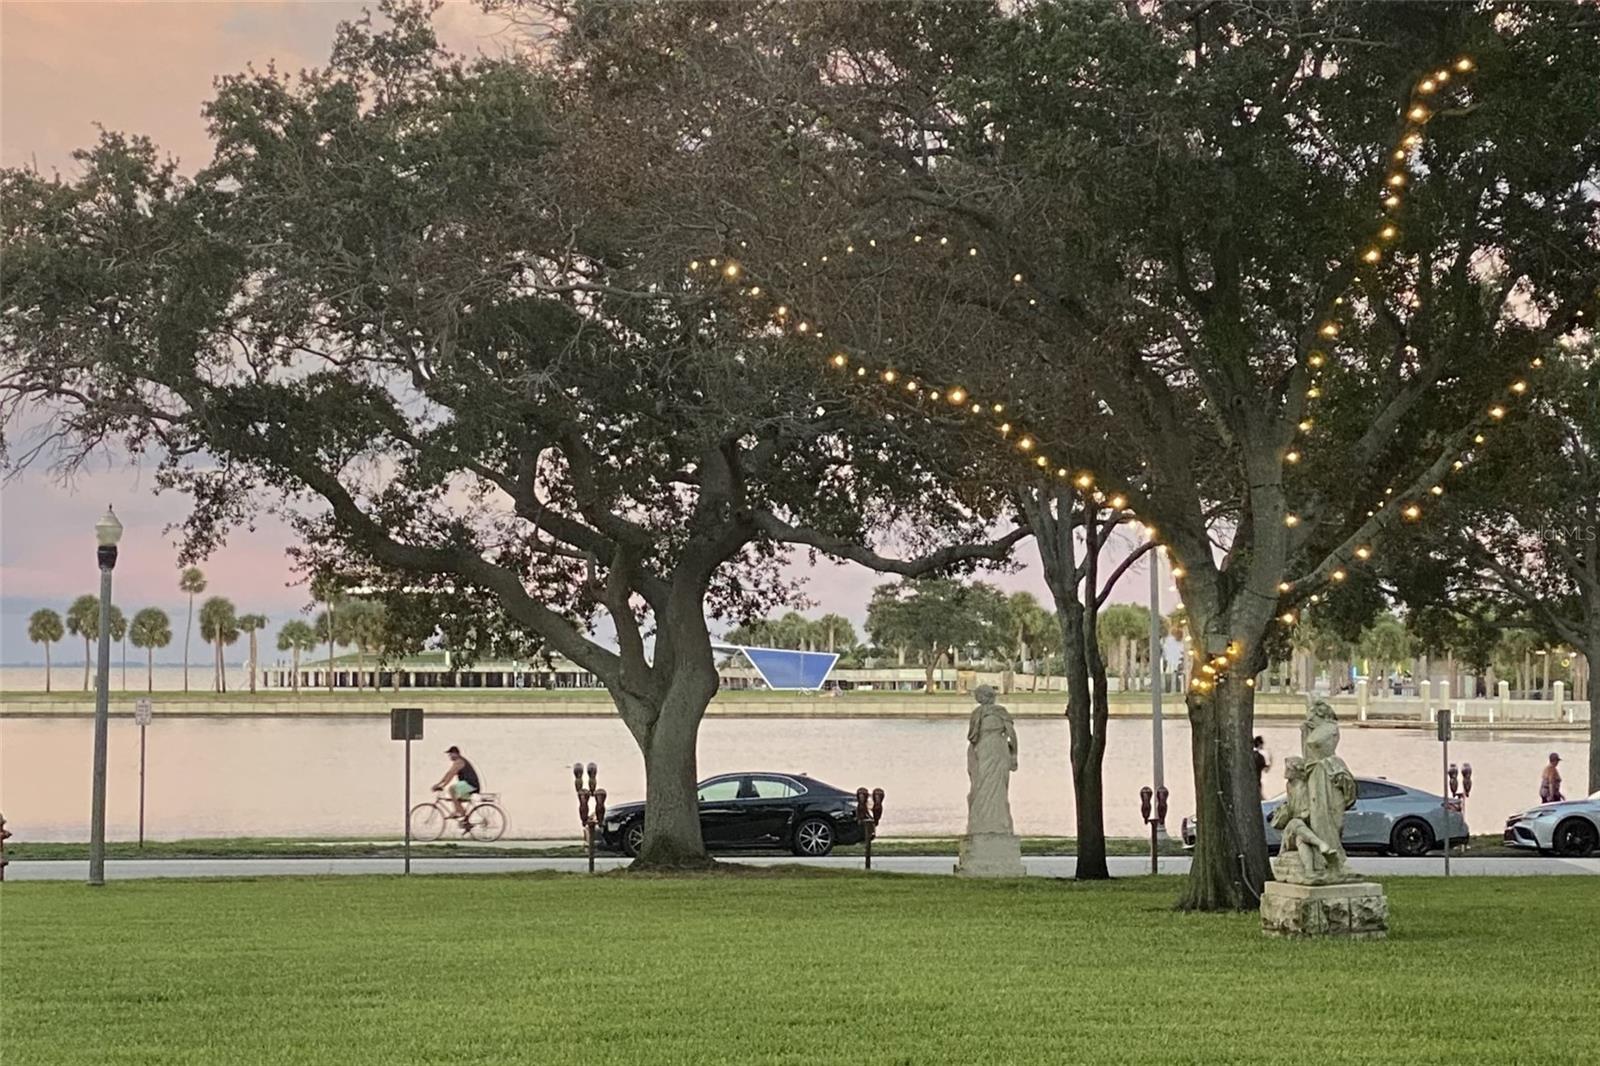 Living near downtown St Petersburg has its perks! Imagine strolling through Vinoy Park as the sun sets in the distance. Here you see just that, with the St Pete Pier in the background.